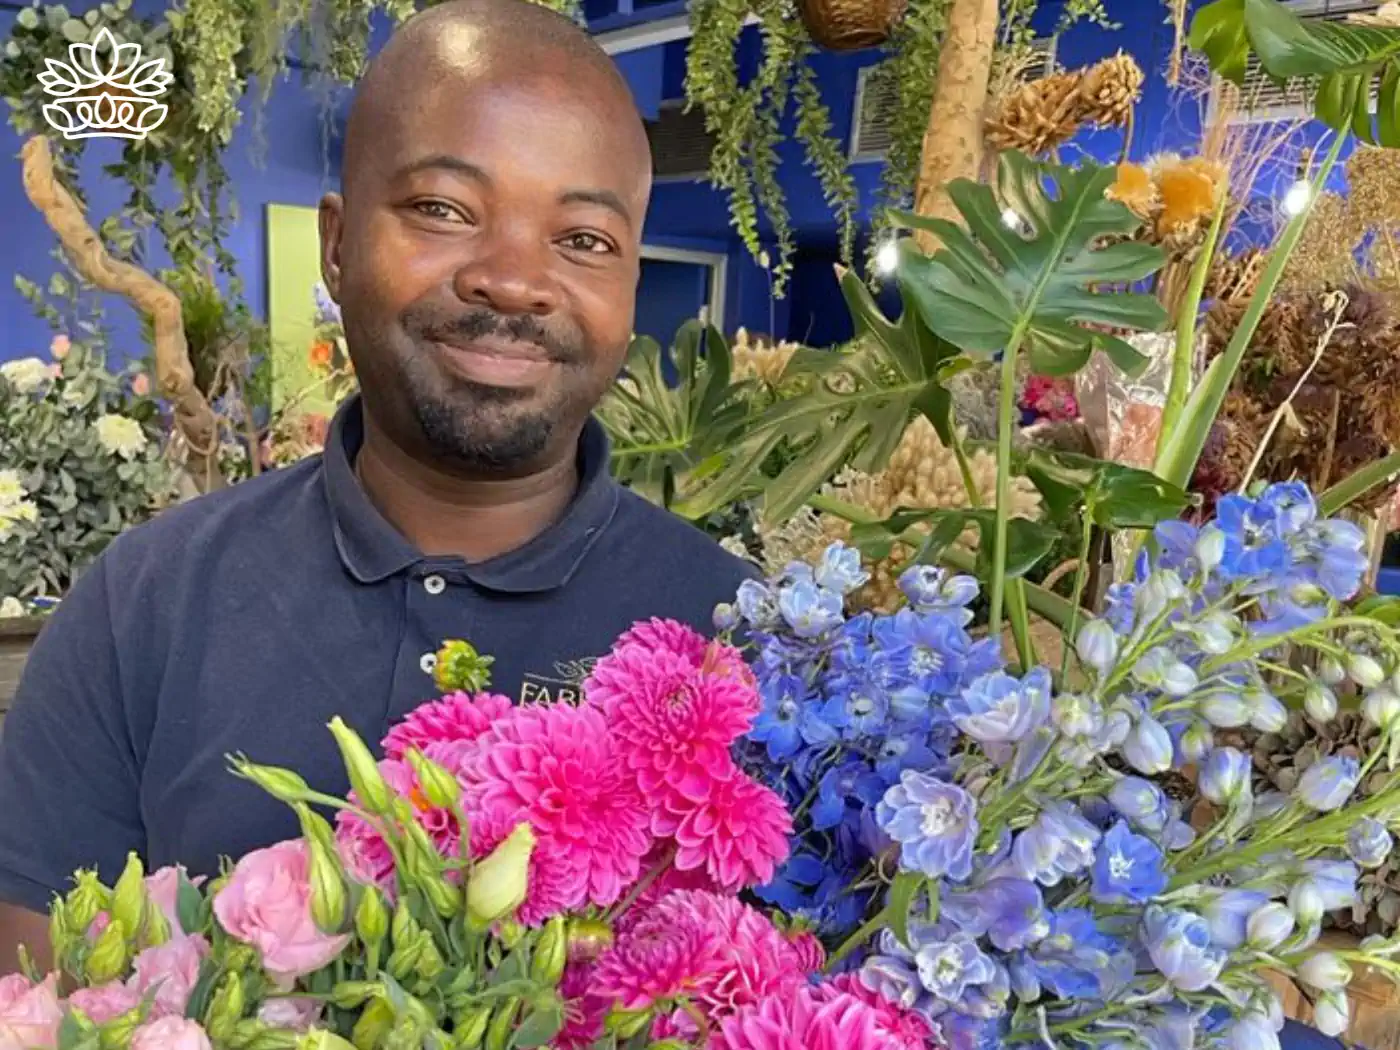 Smiling gentleman presenting a vibrant bouquet with pink roses, magenta dahlias, and blue delphiniums, available at Fabulous Flowers and Gifts.